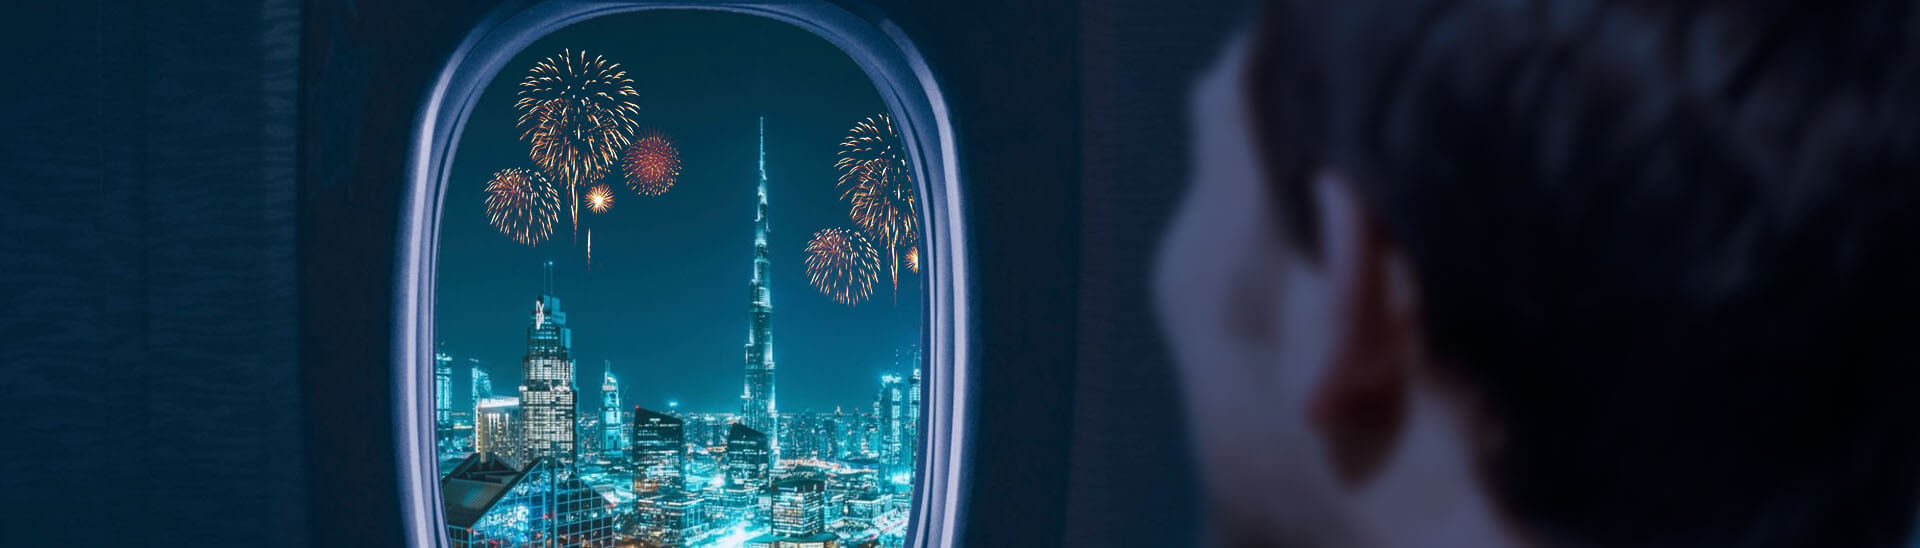 8 Best Reasons To Get Cheap Red Eye Flight Deals During New Year